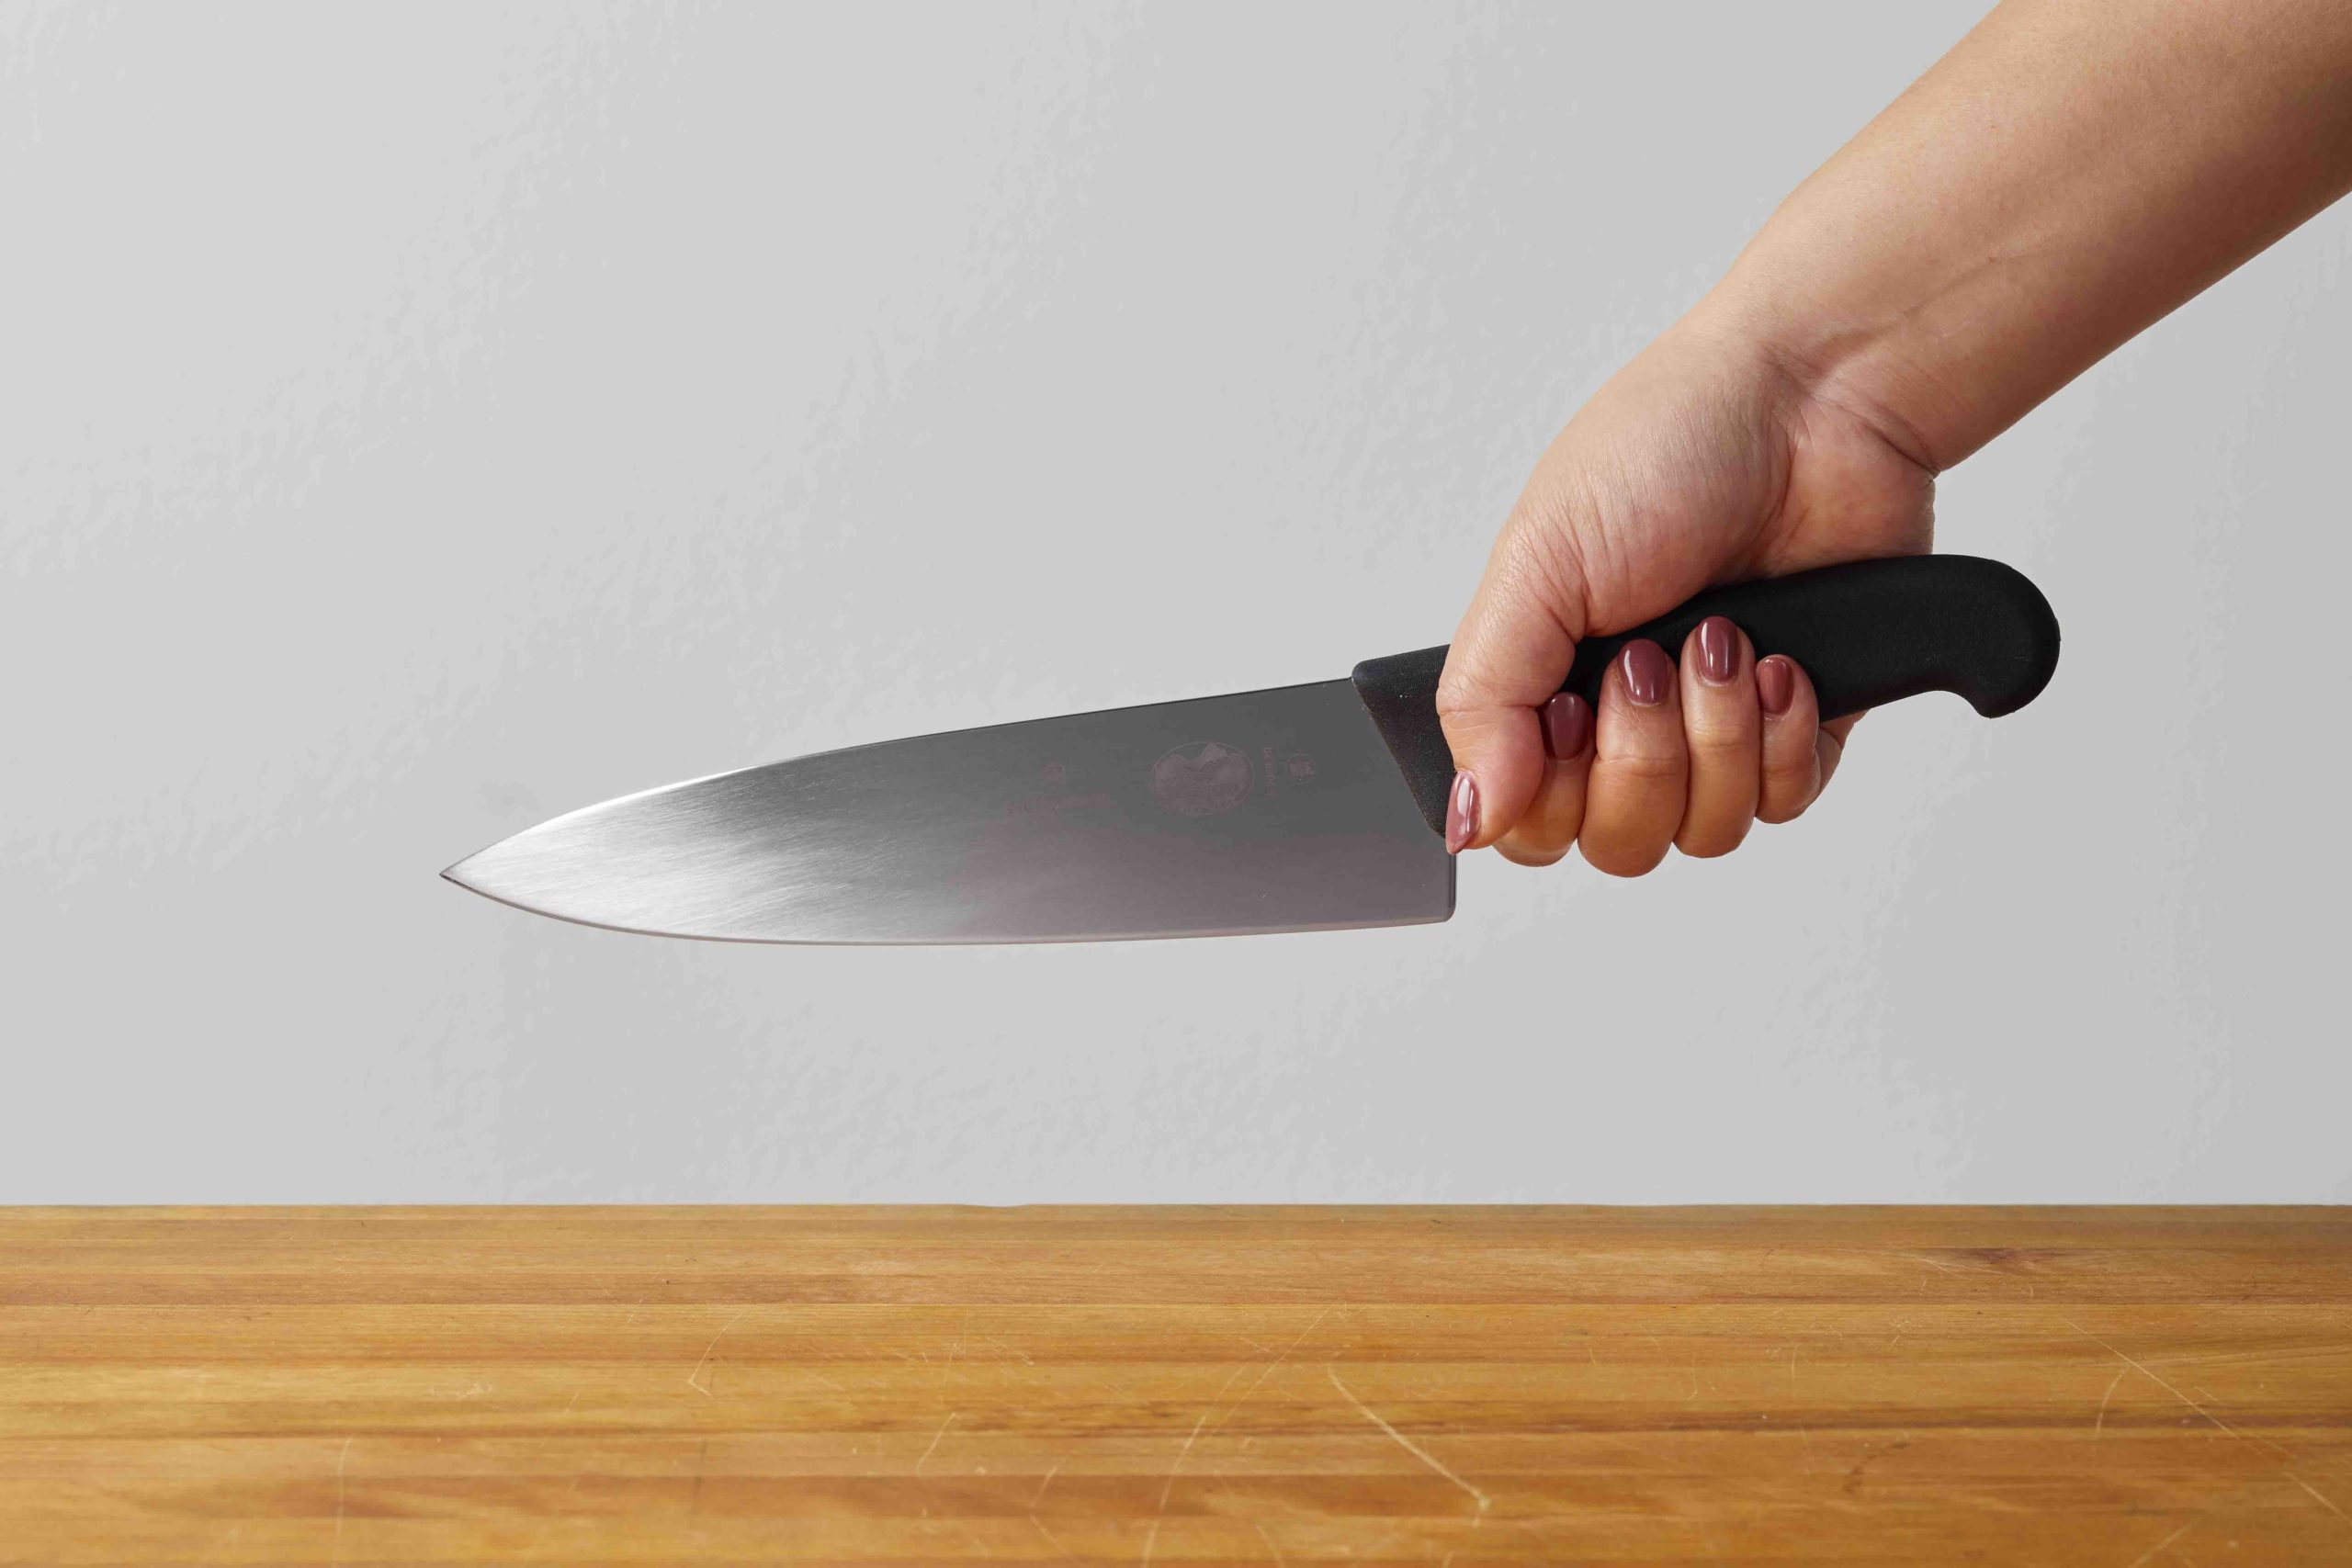 Knife Skills for Beginners: A Visual Guide to Slicing, Dicing, and More